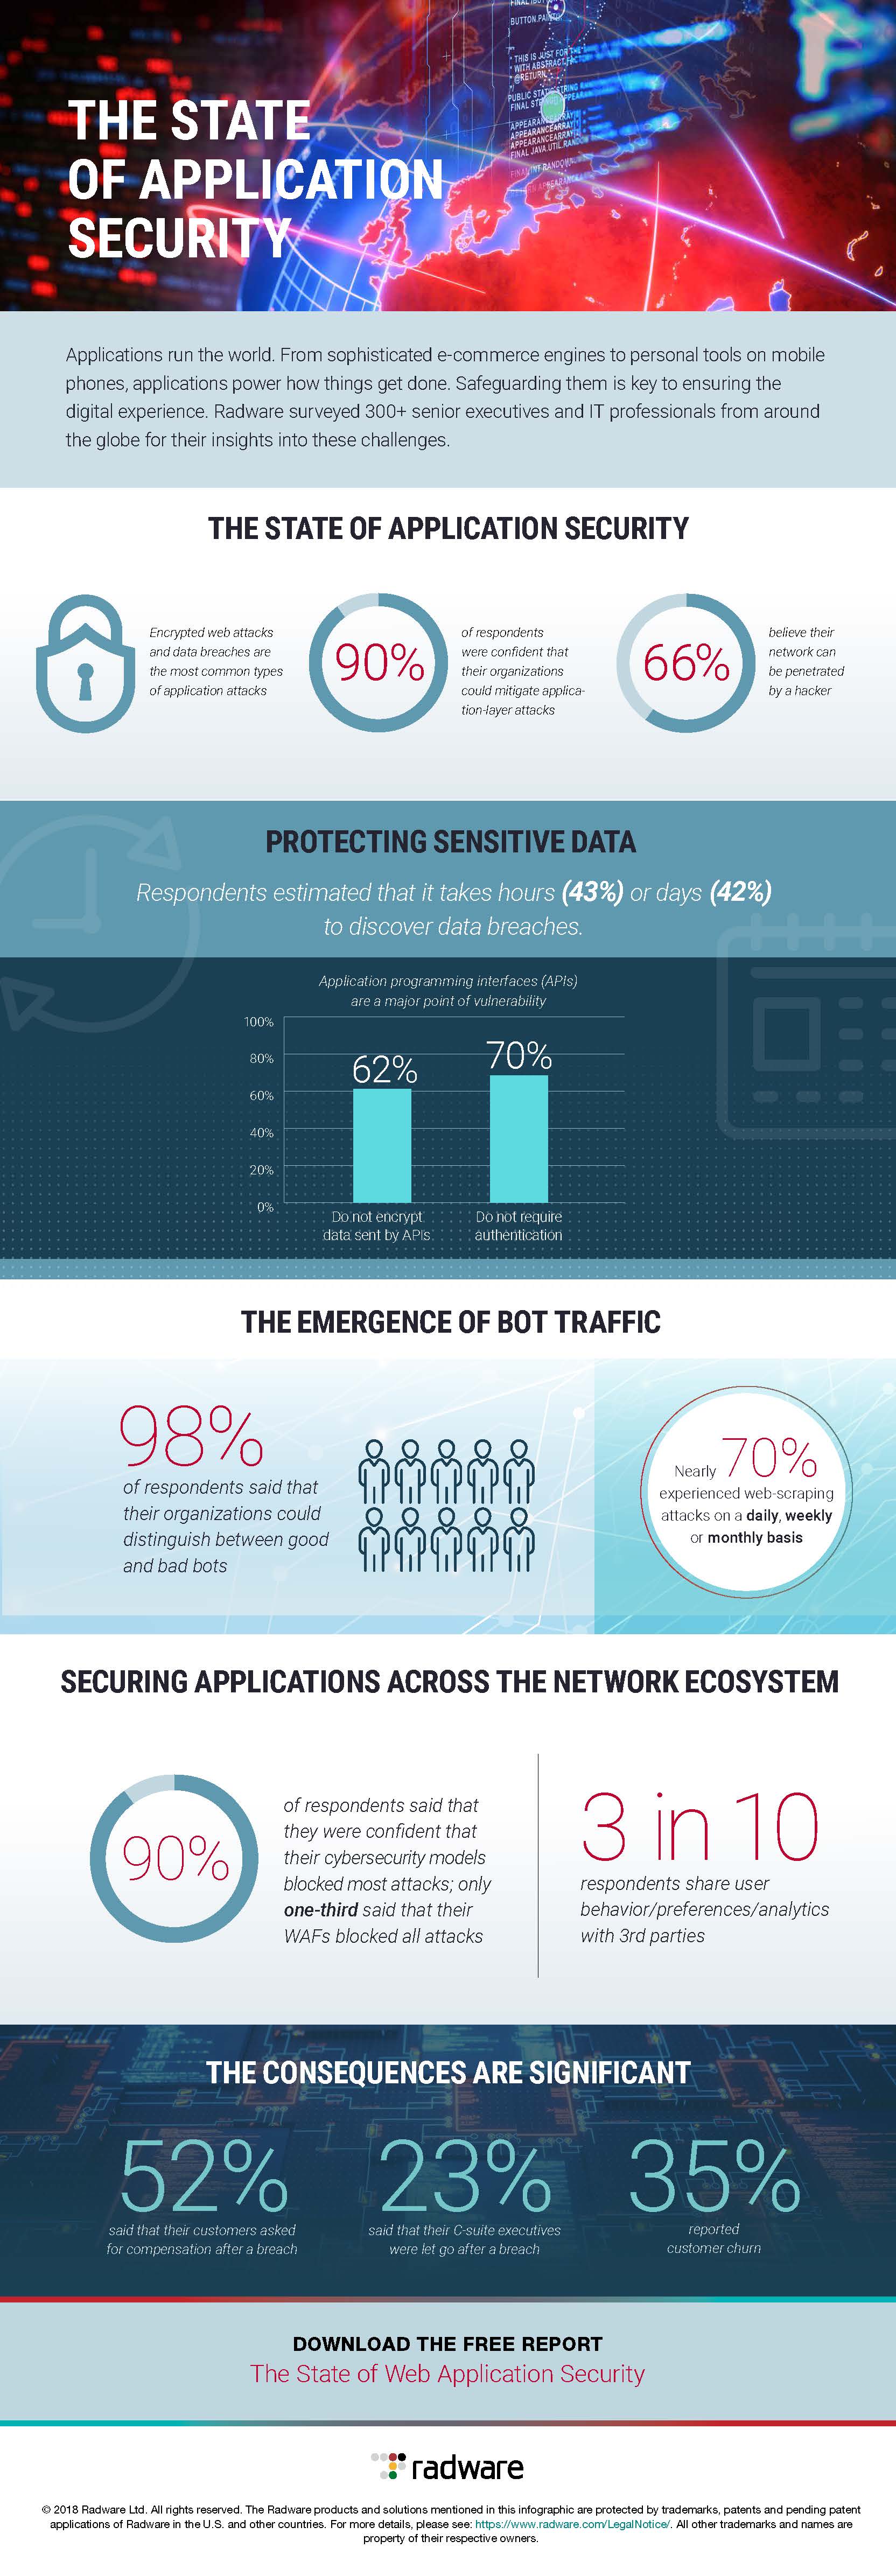 The State of Application Security Infographic